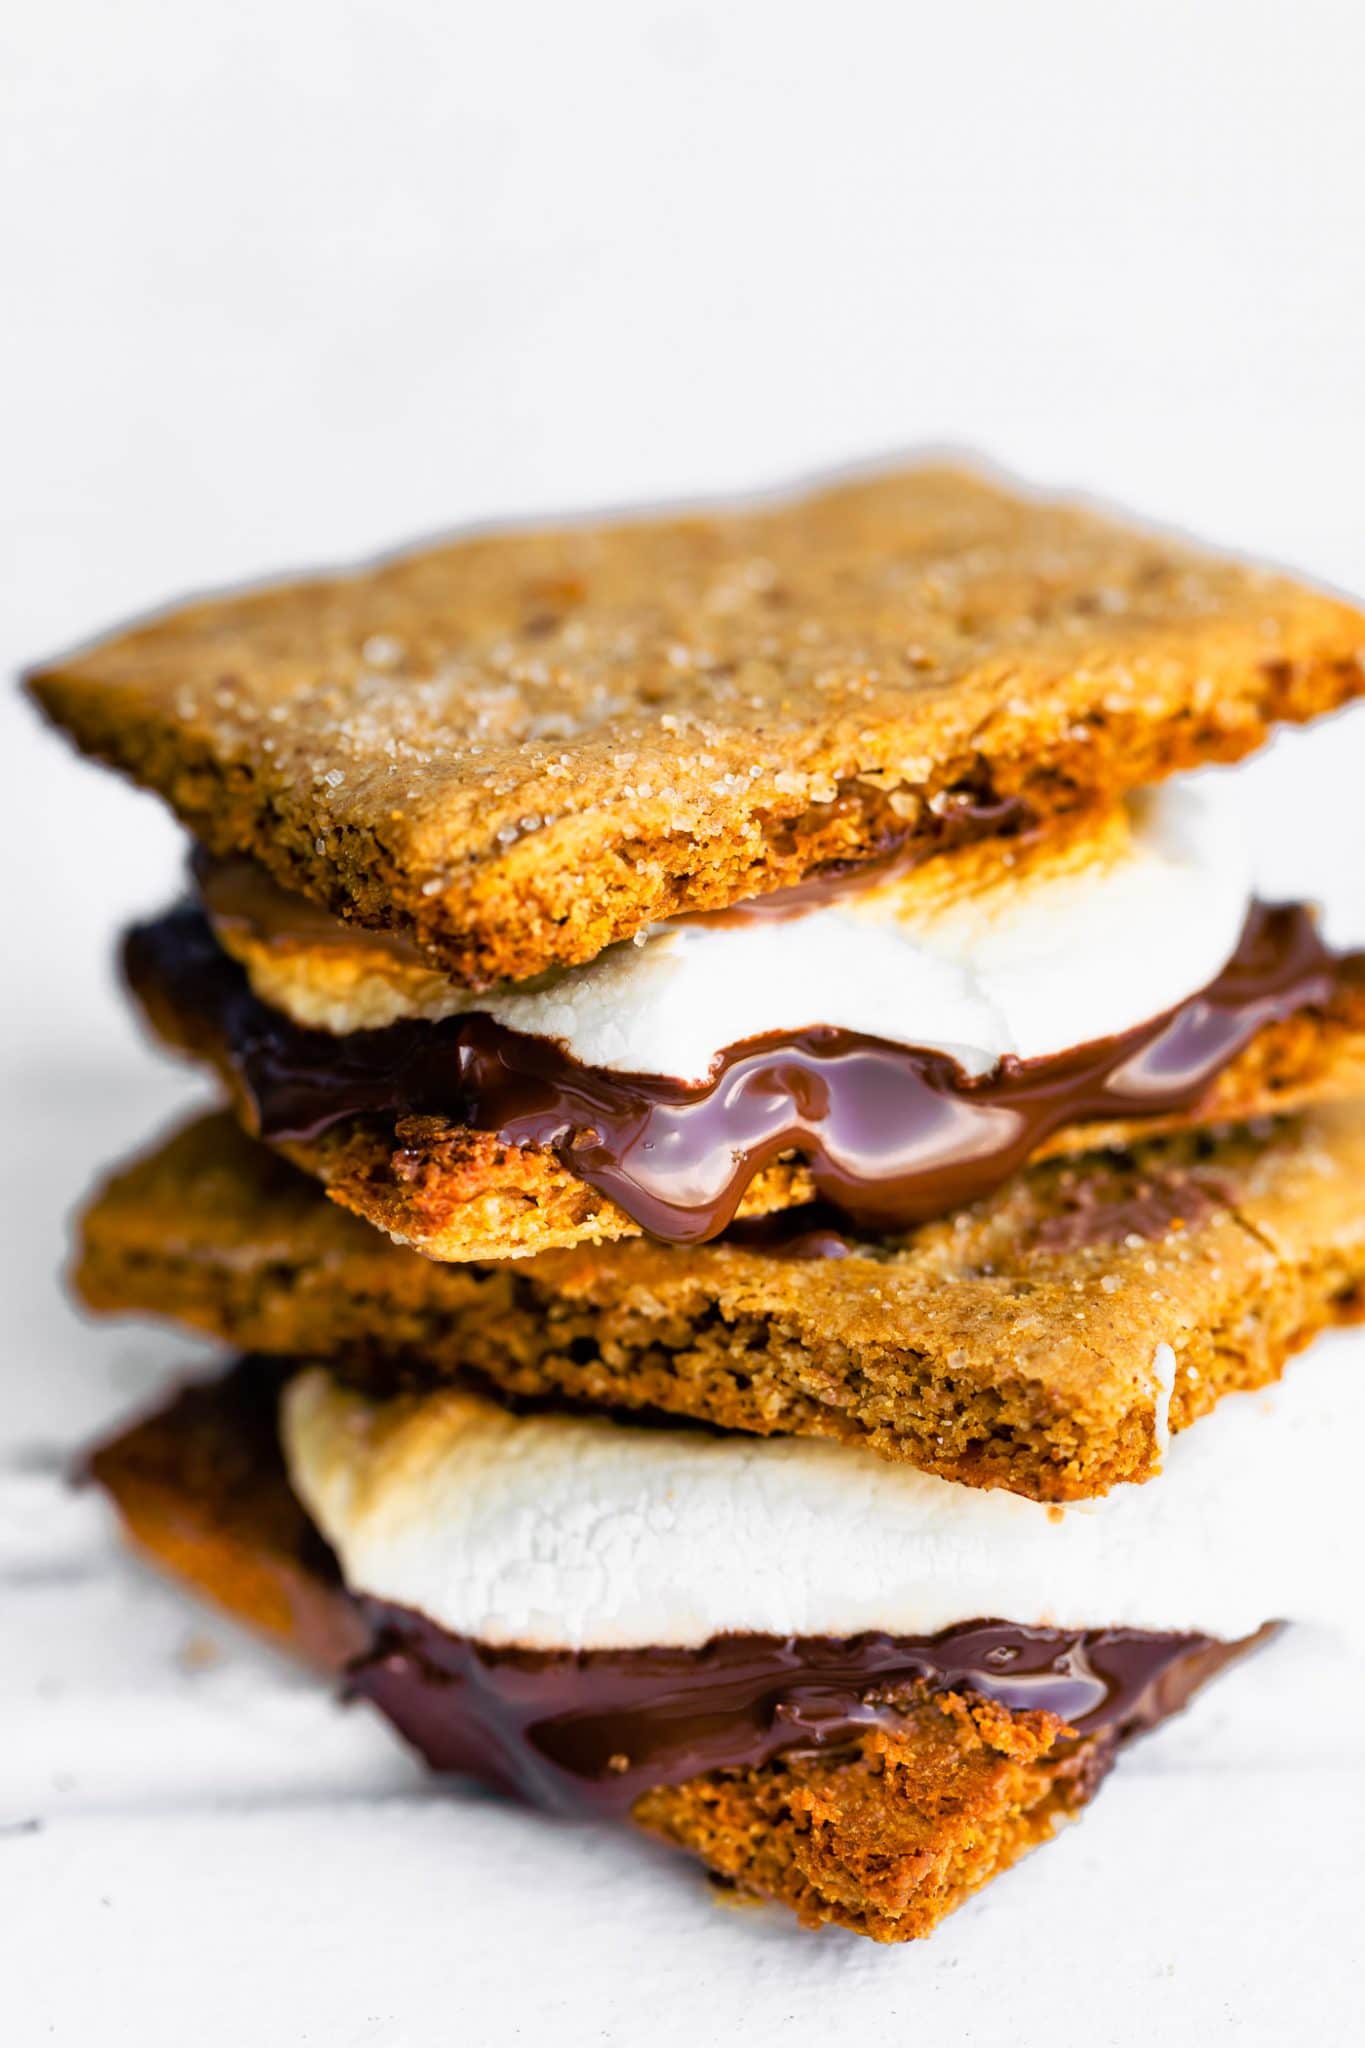 Close up image of gluten free smores with melted homemade marshmallows and chocolate.